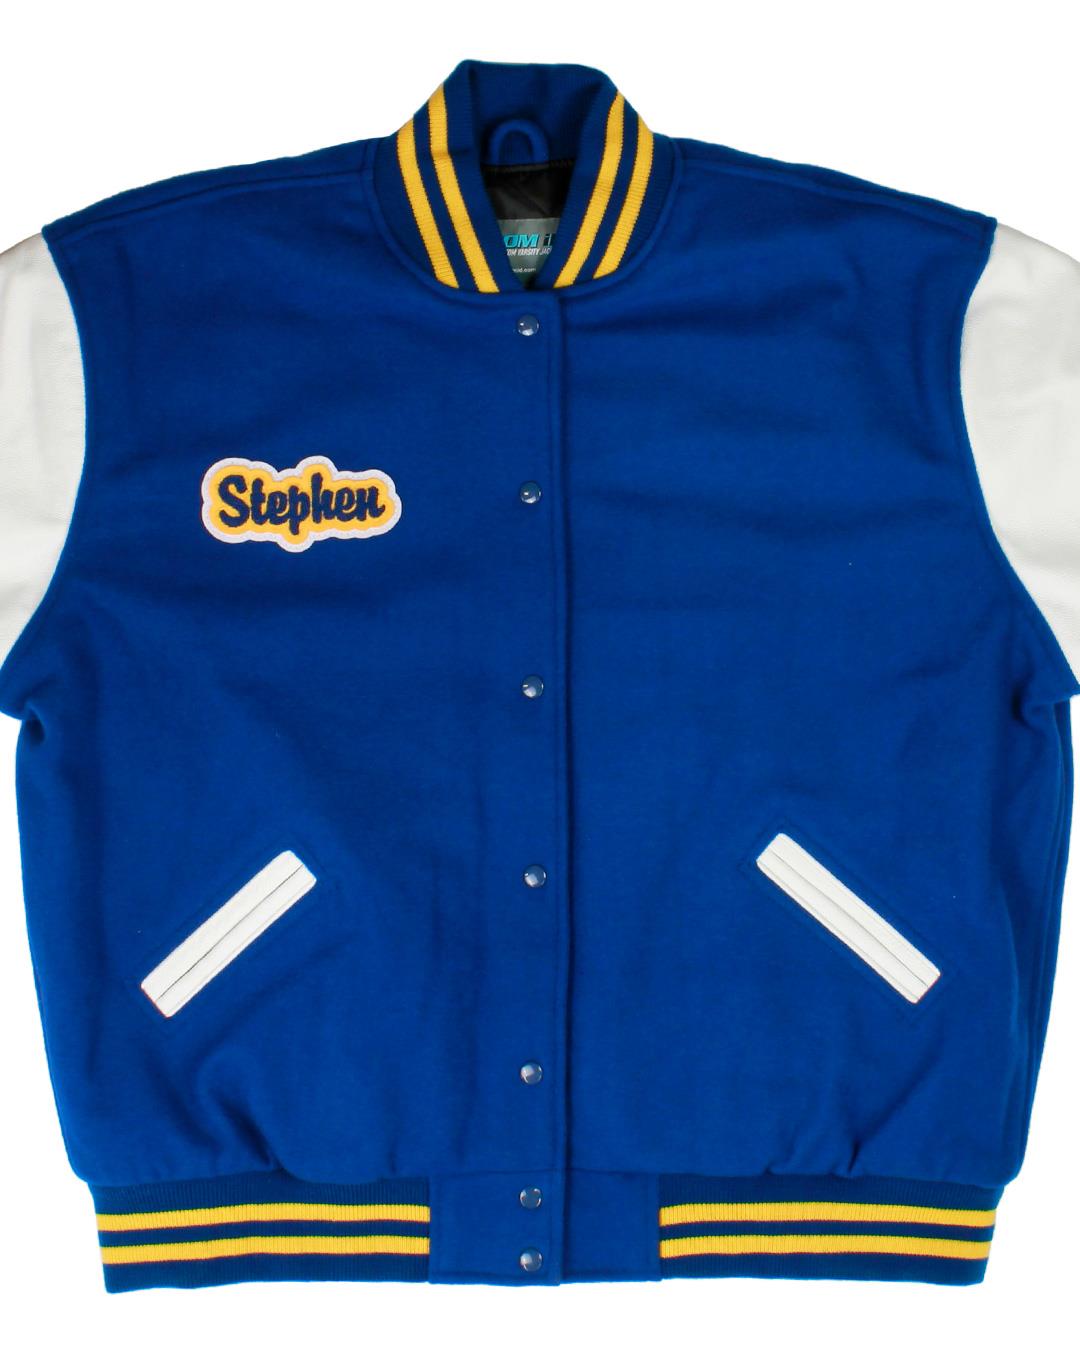 Crook County High School Letterman Jacket, Prineville OR - Front